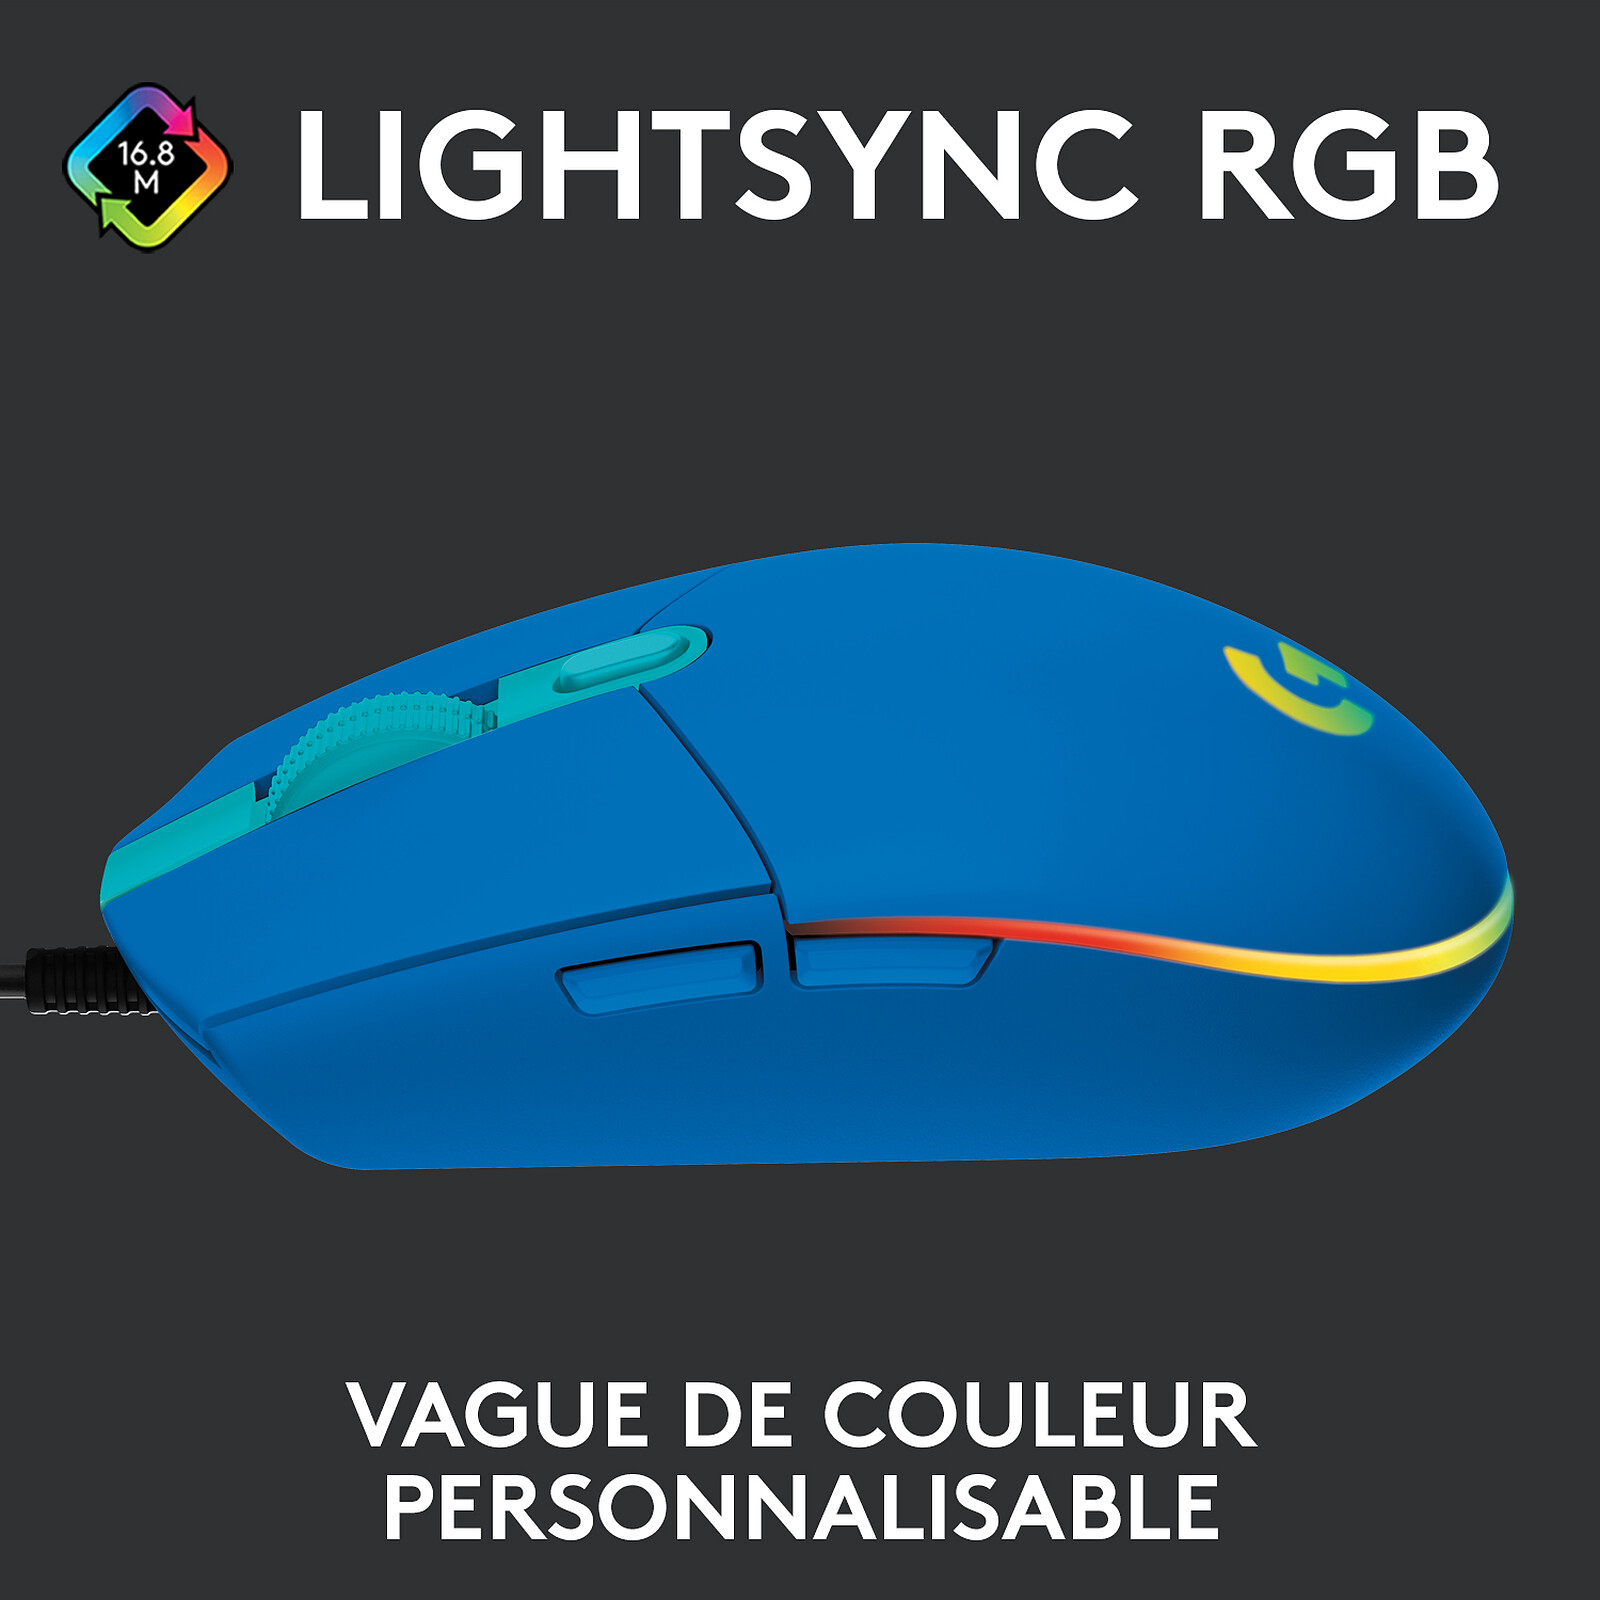 Mouse LOGITECH GAMING G203 BLUE – Compured